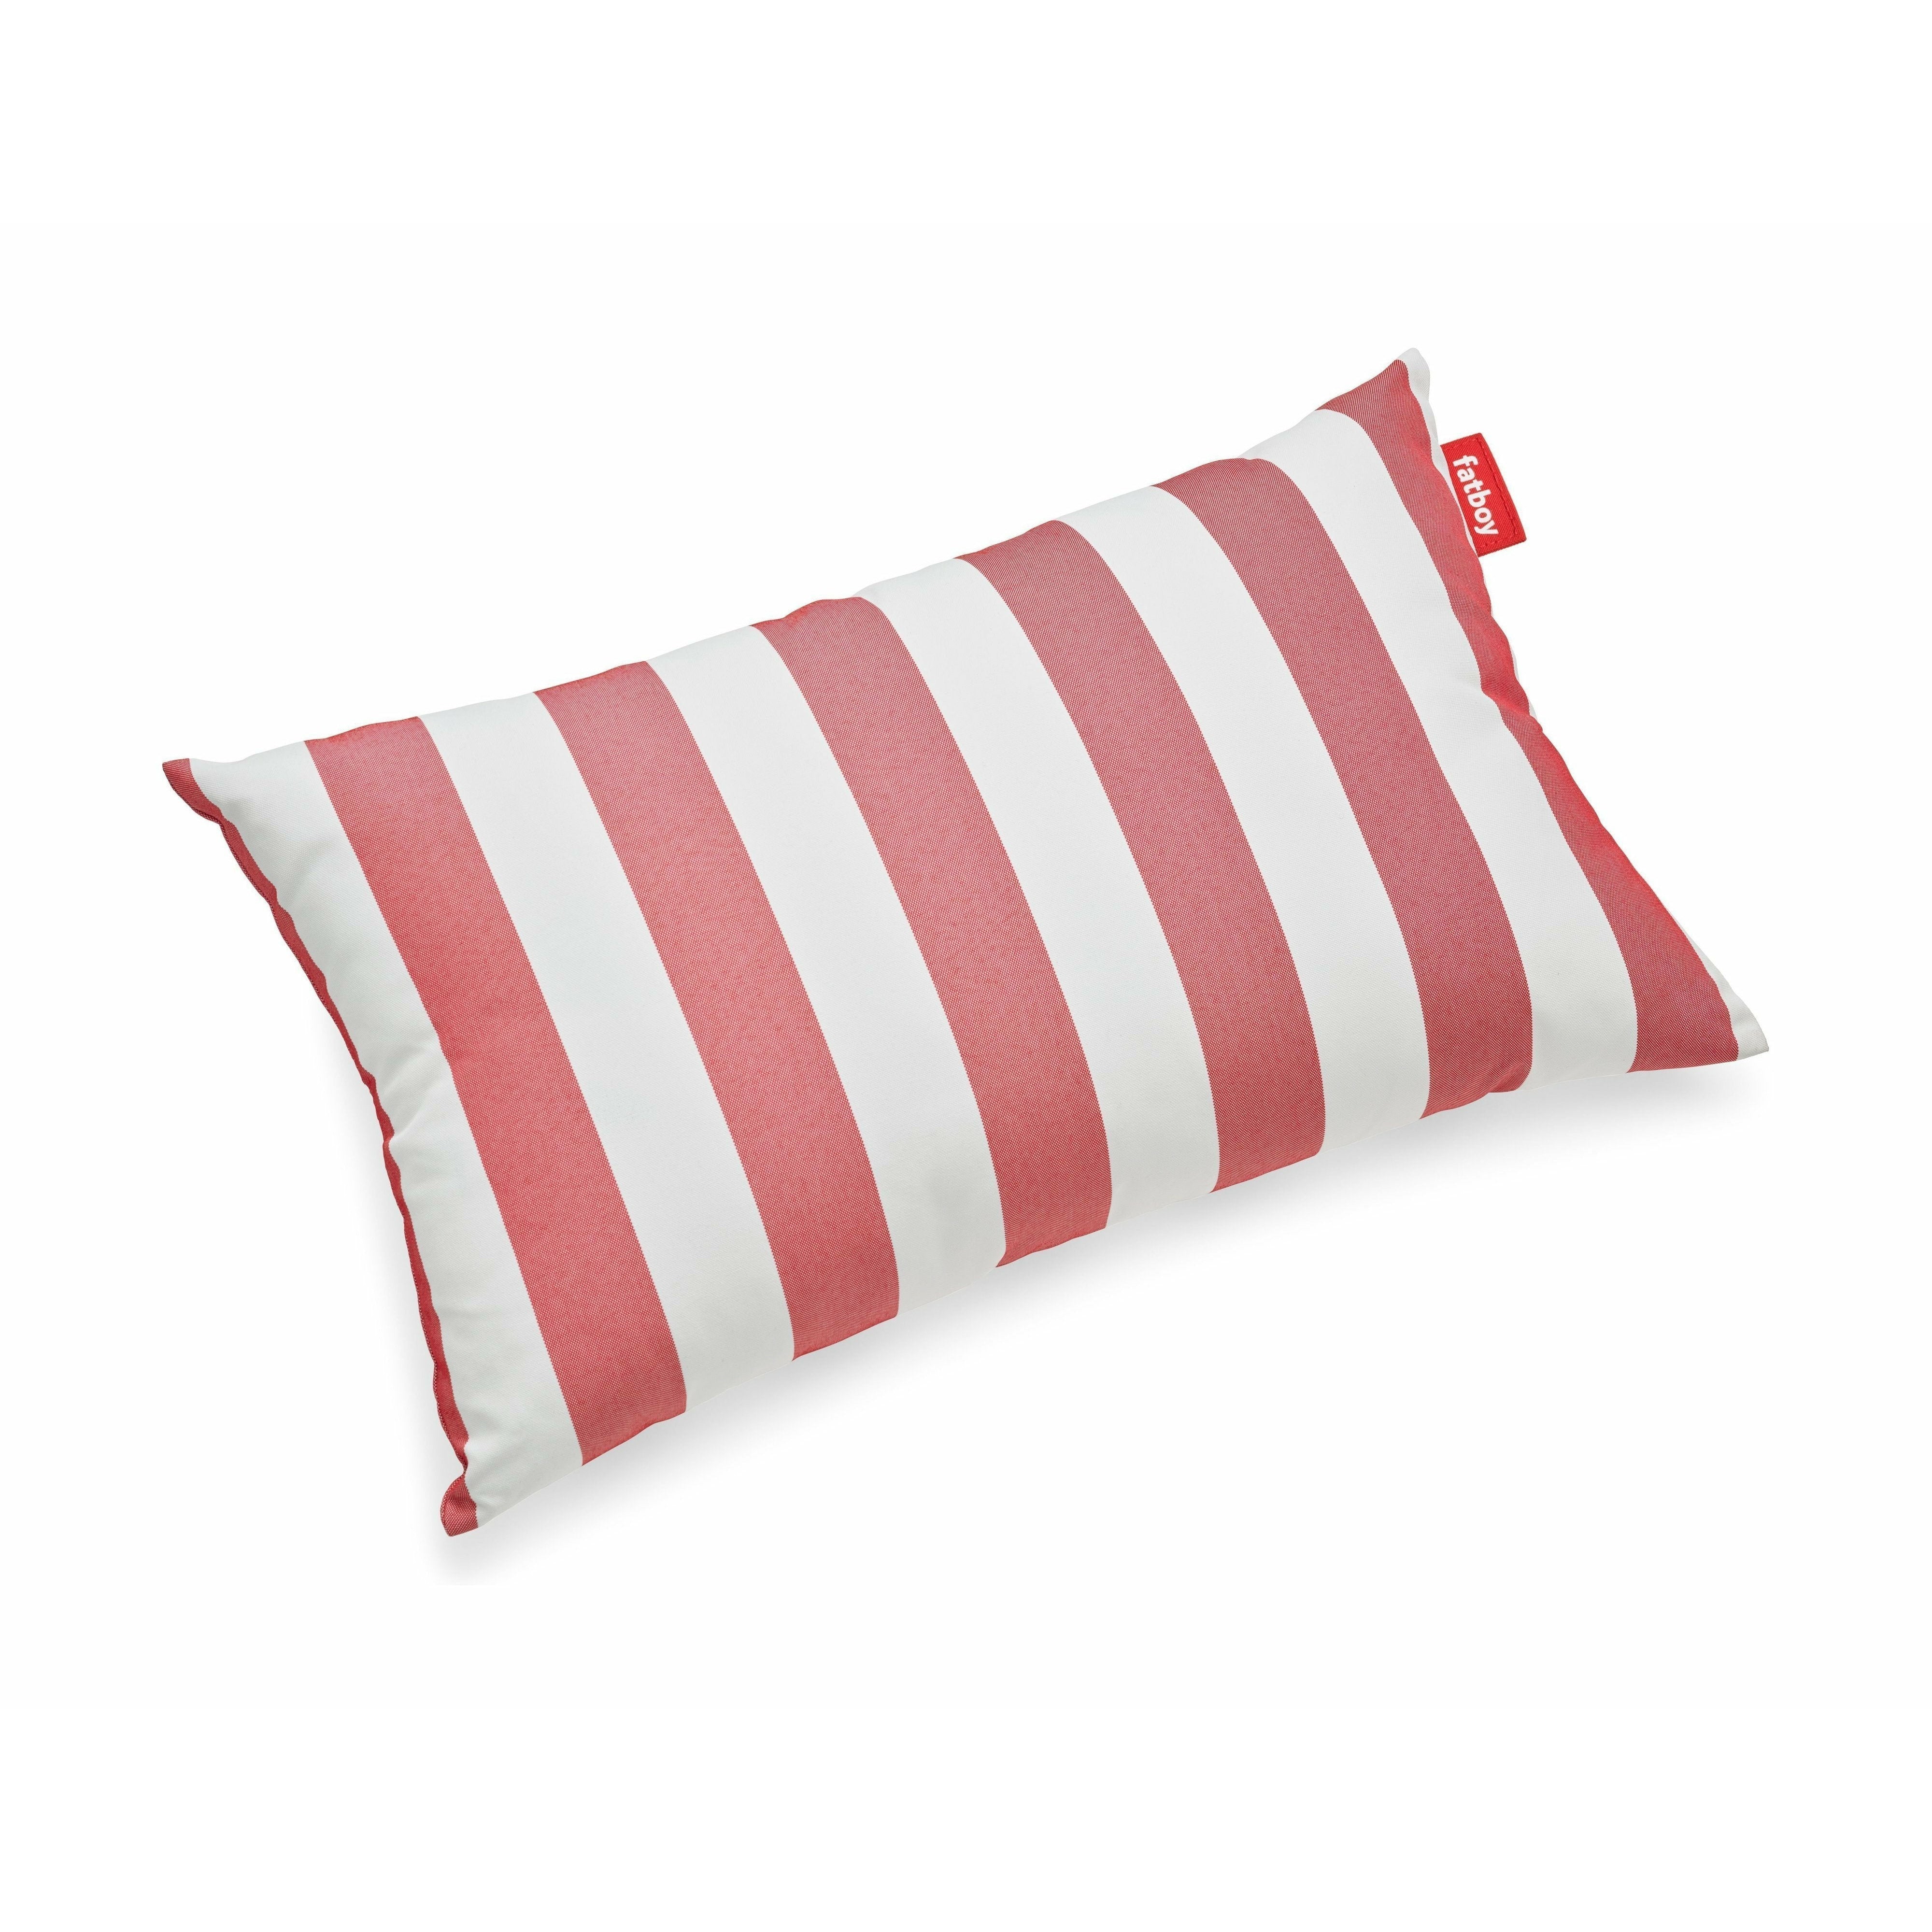 Fatboy Pillow King Outdoor, Red Striped